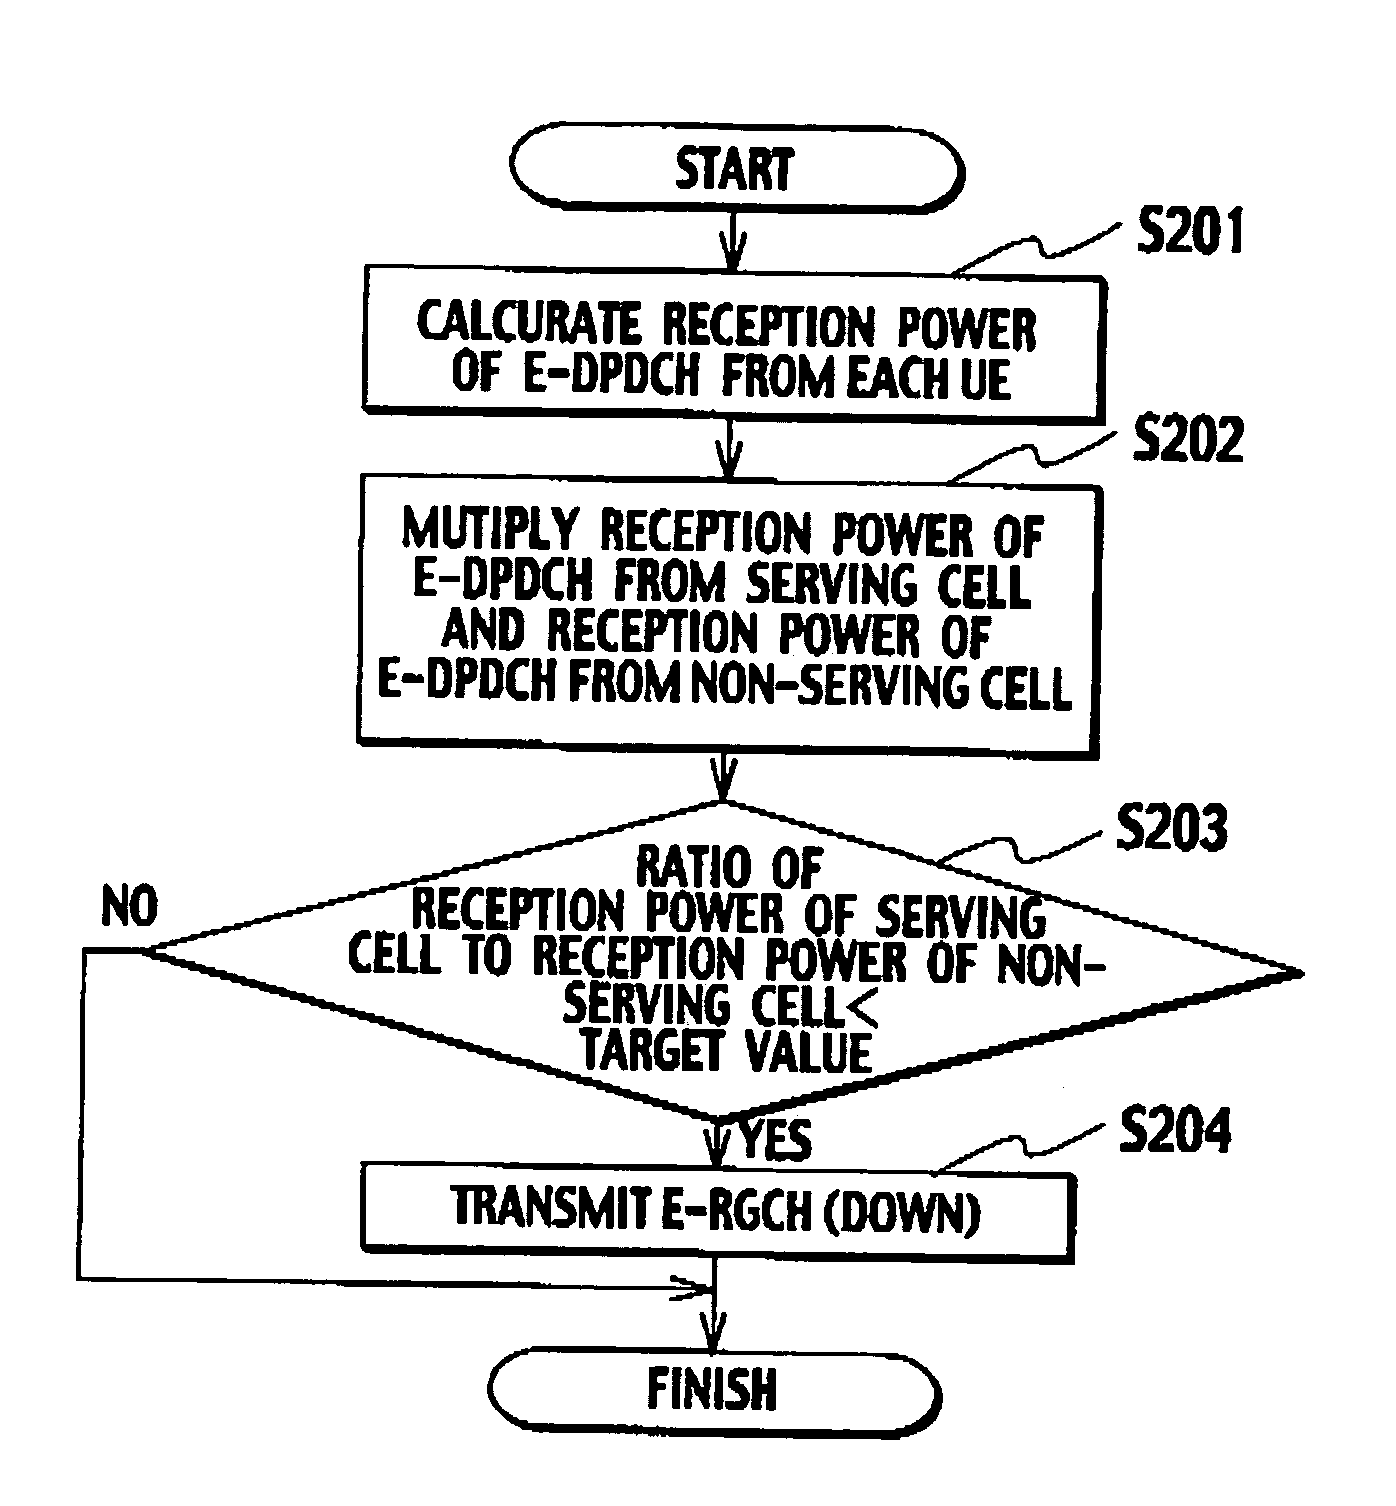 Transmission rate control method, mobile station, radio base station, and radio network controller